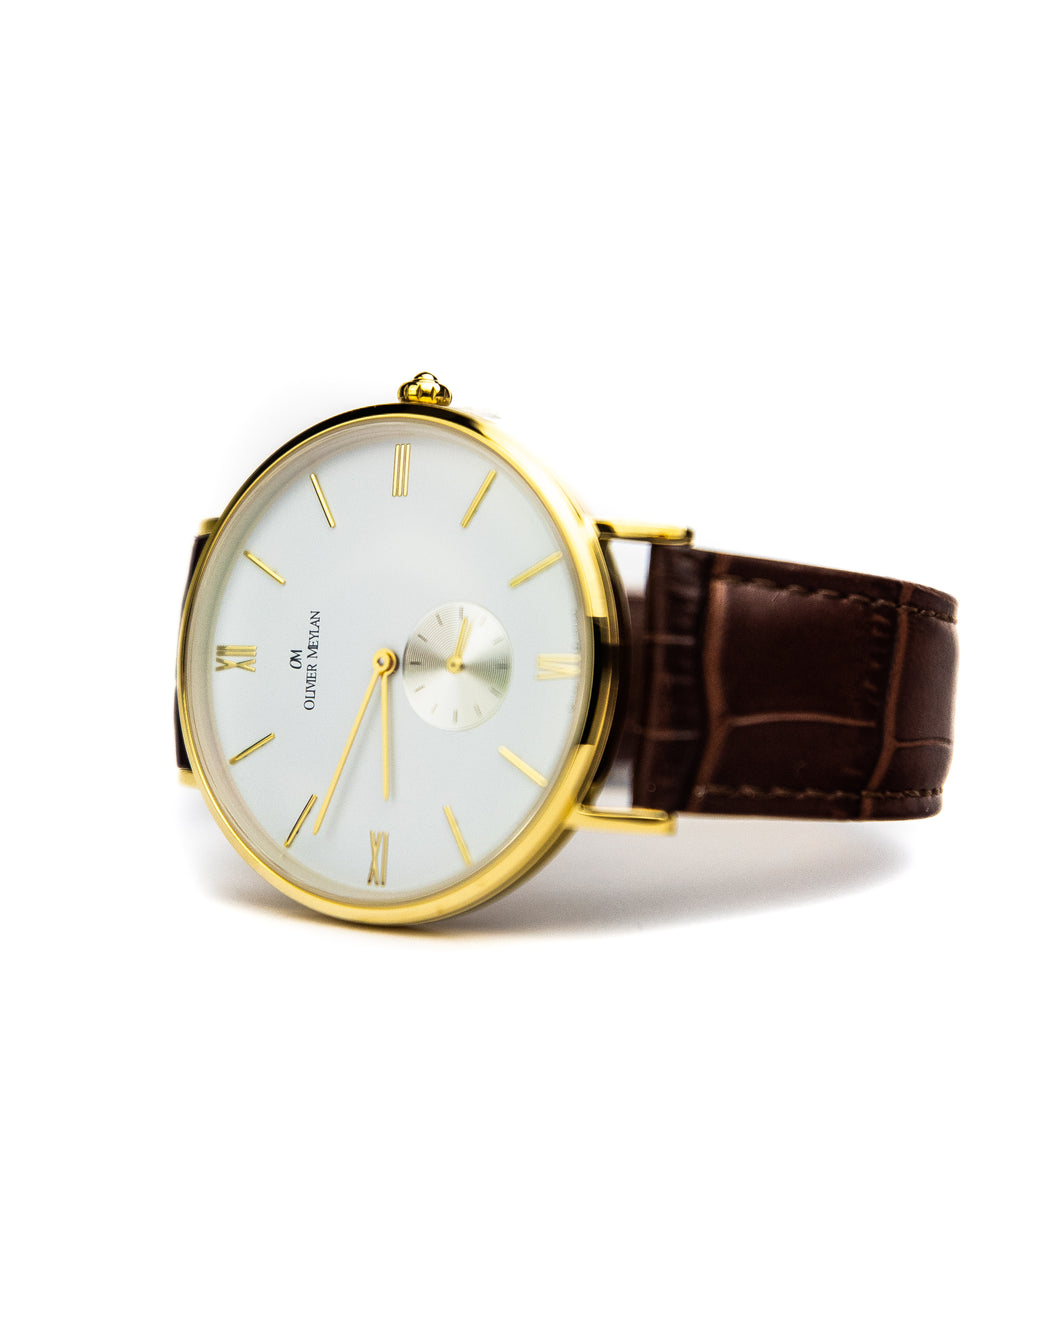 The Richemont Yellow Gold / Brown strap 40mm